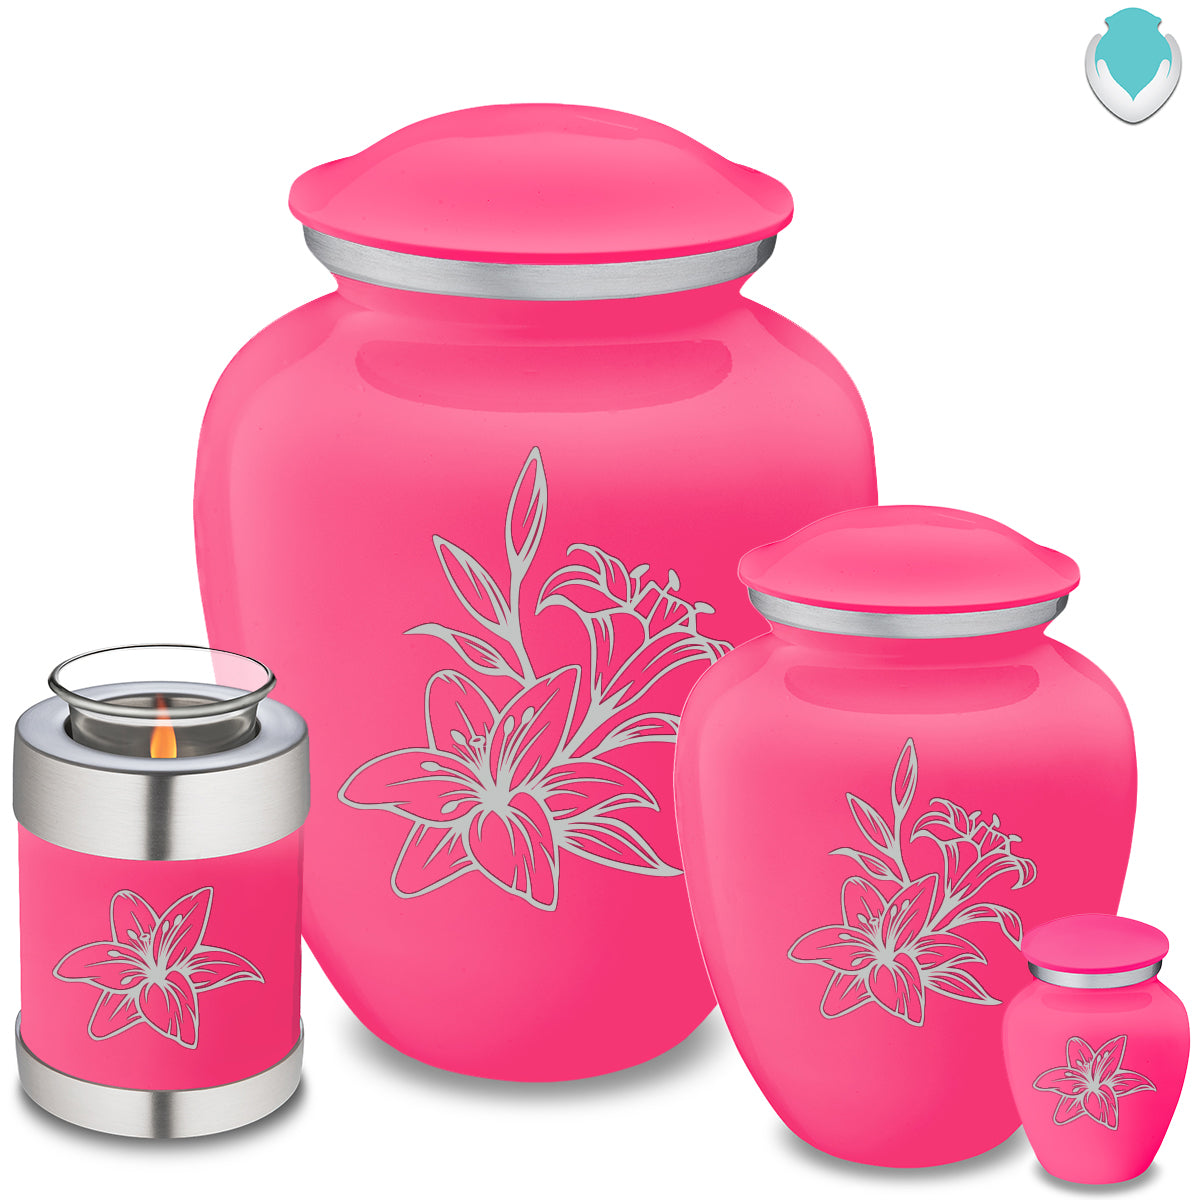 Adult Embrace Bright Pink Lily Cremation Urn